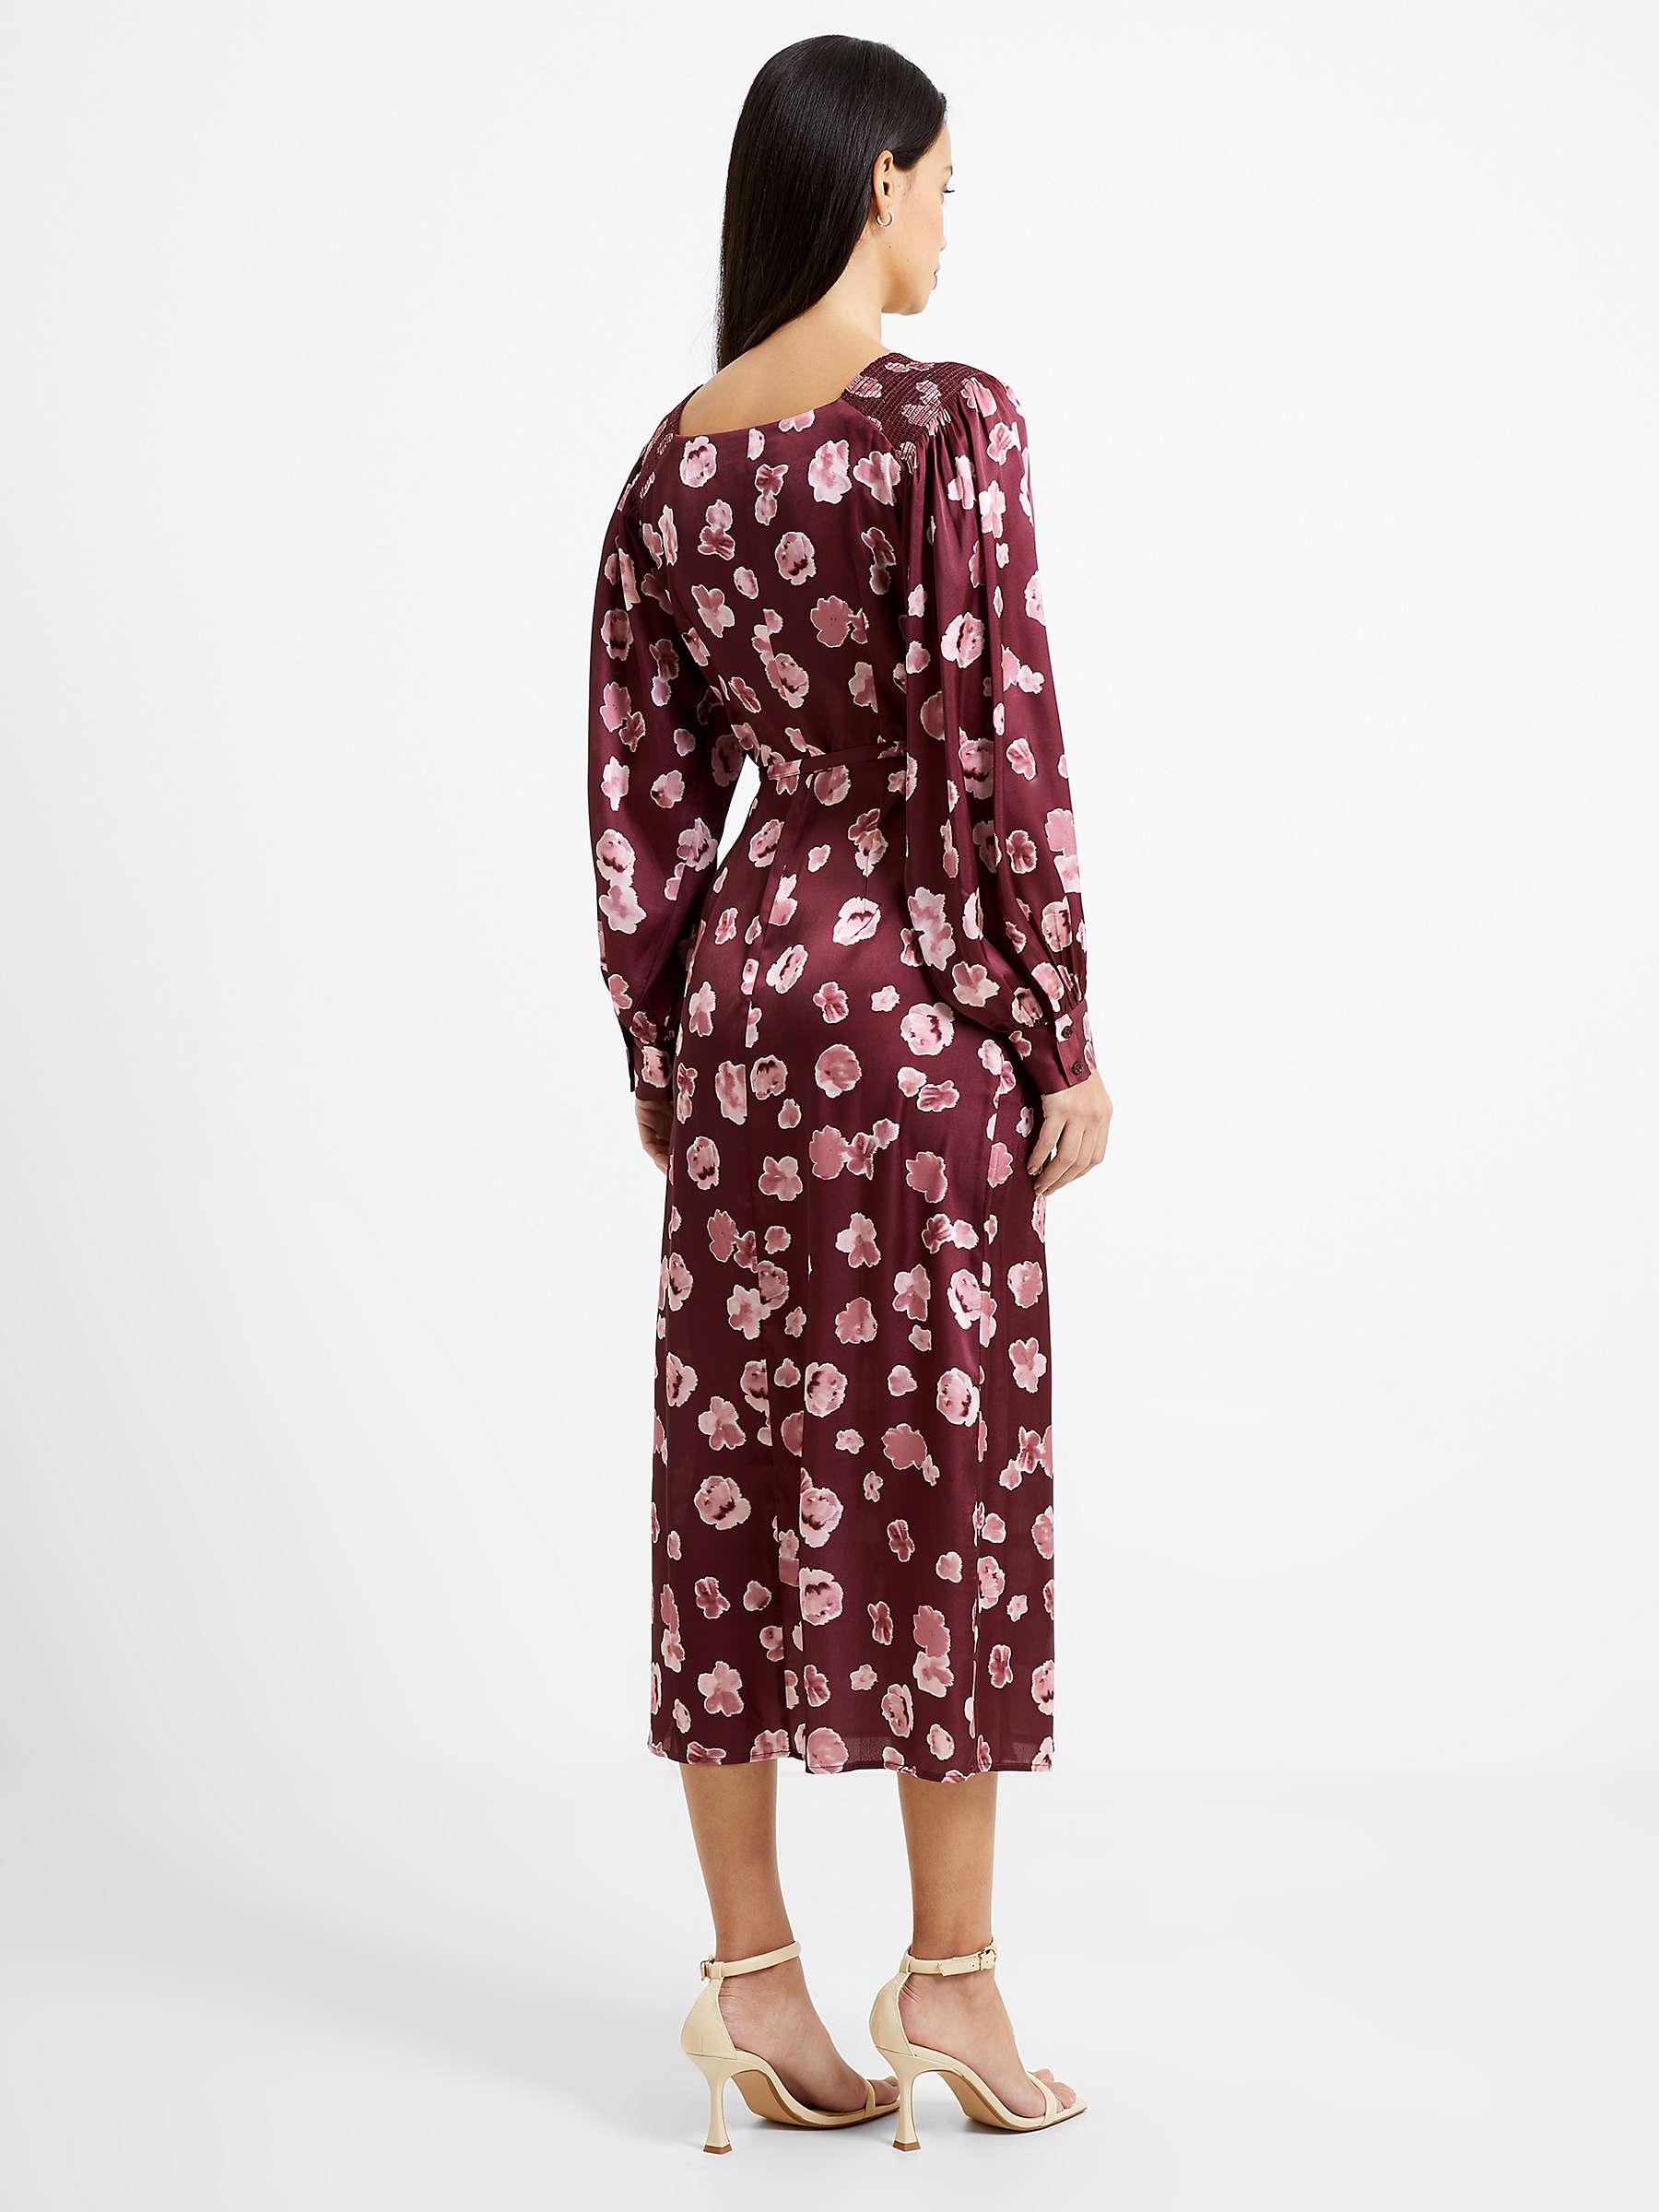 Buy French Connection Bronwen Floral Satin Wrap Dress, Chocolate Truffle Online at johnlewis.com